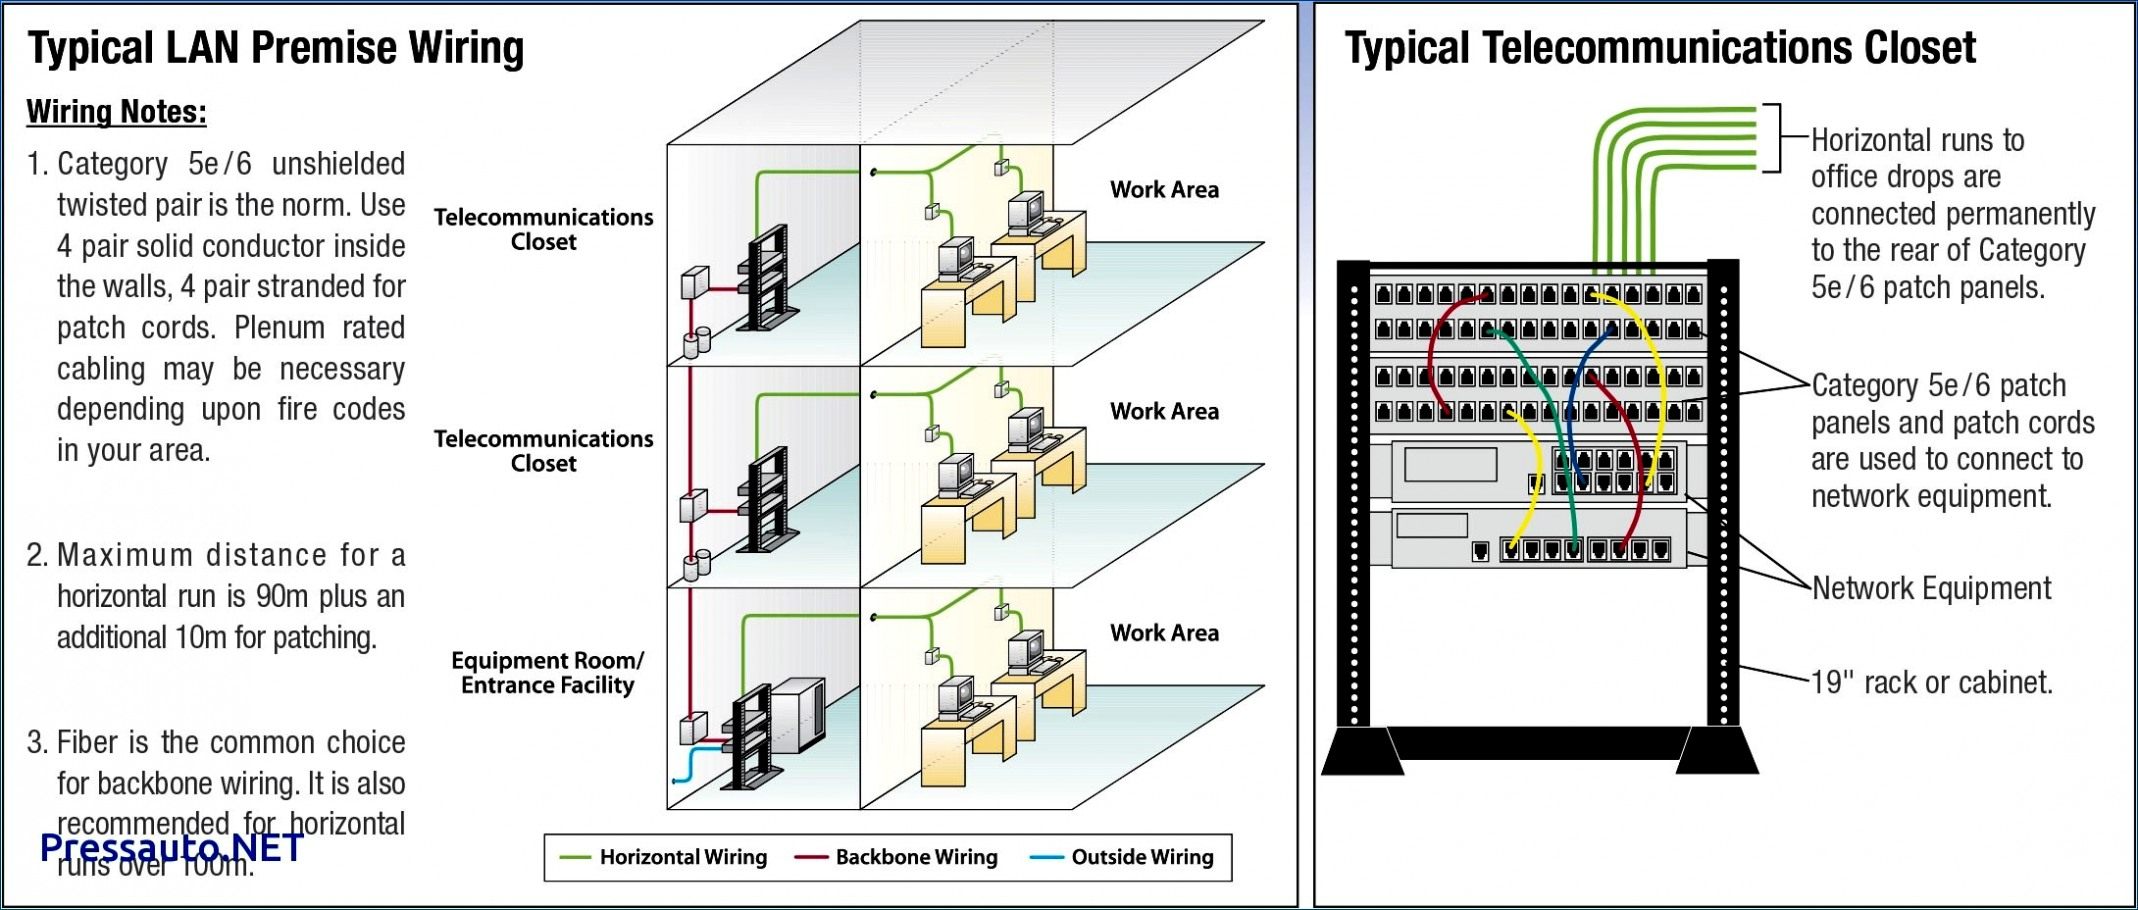 Fios Typical House Wiring Diagram - Trusted Wiring Diagram - Fios Wiring Diagram